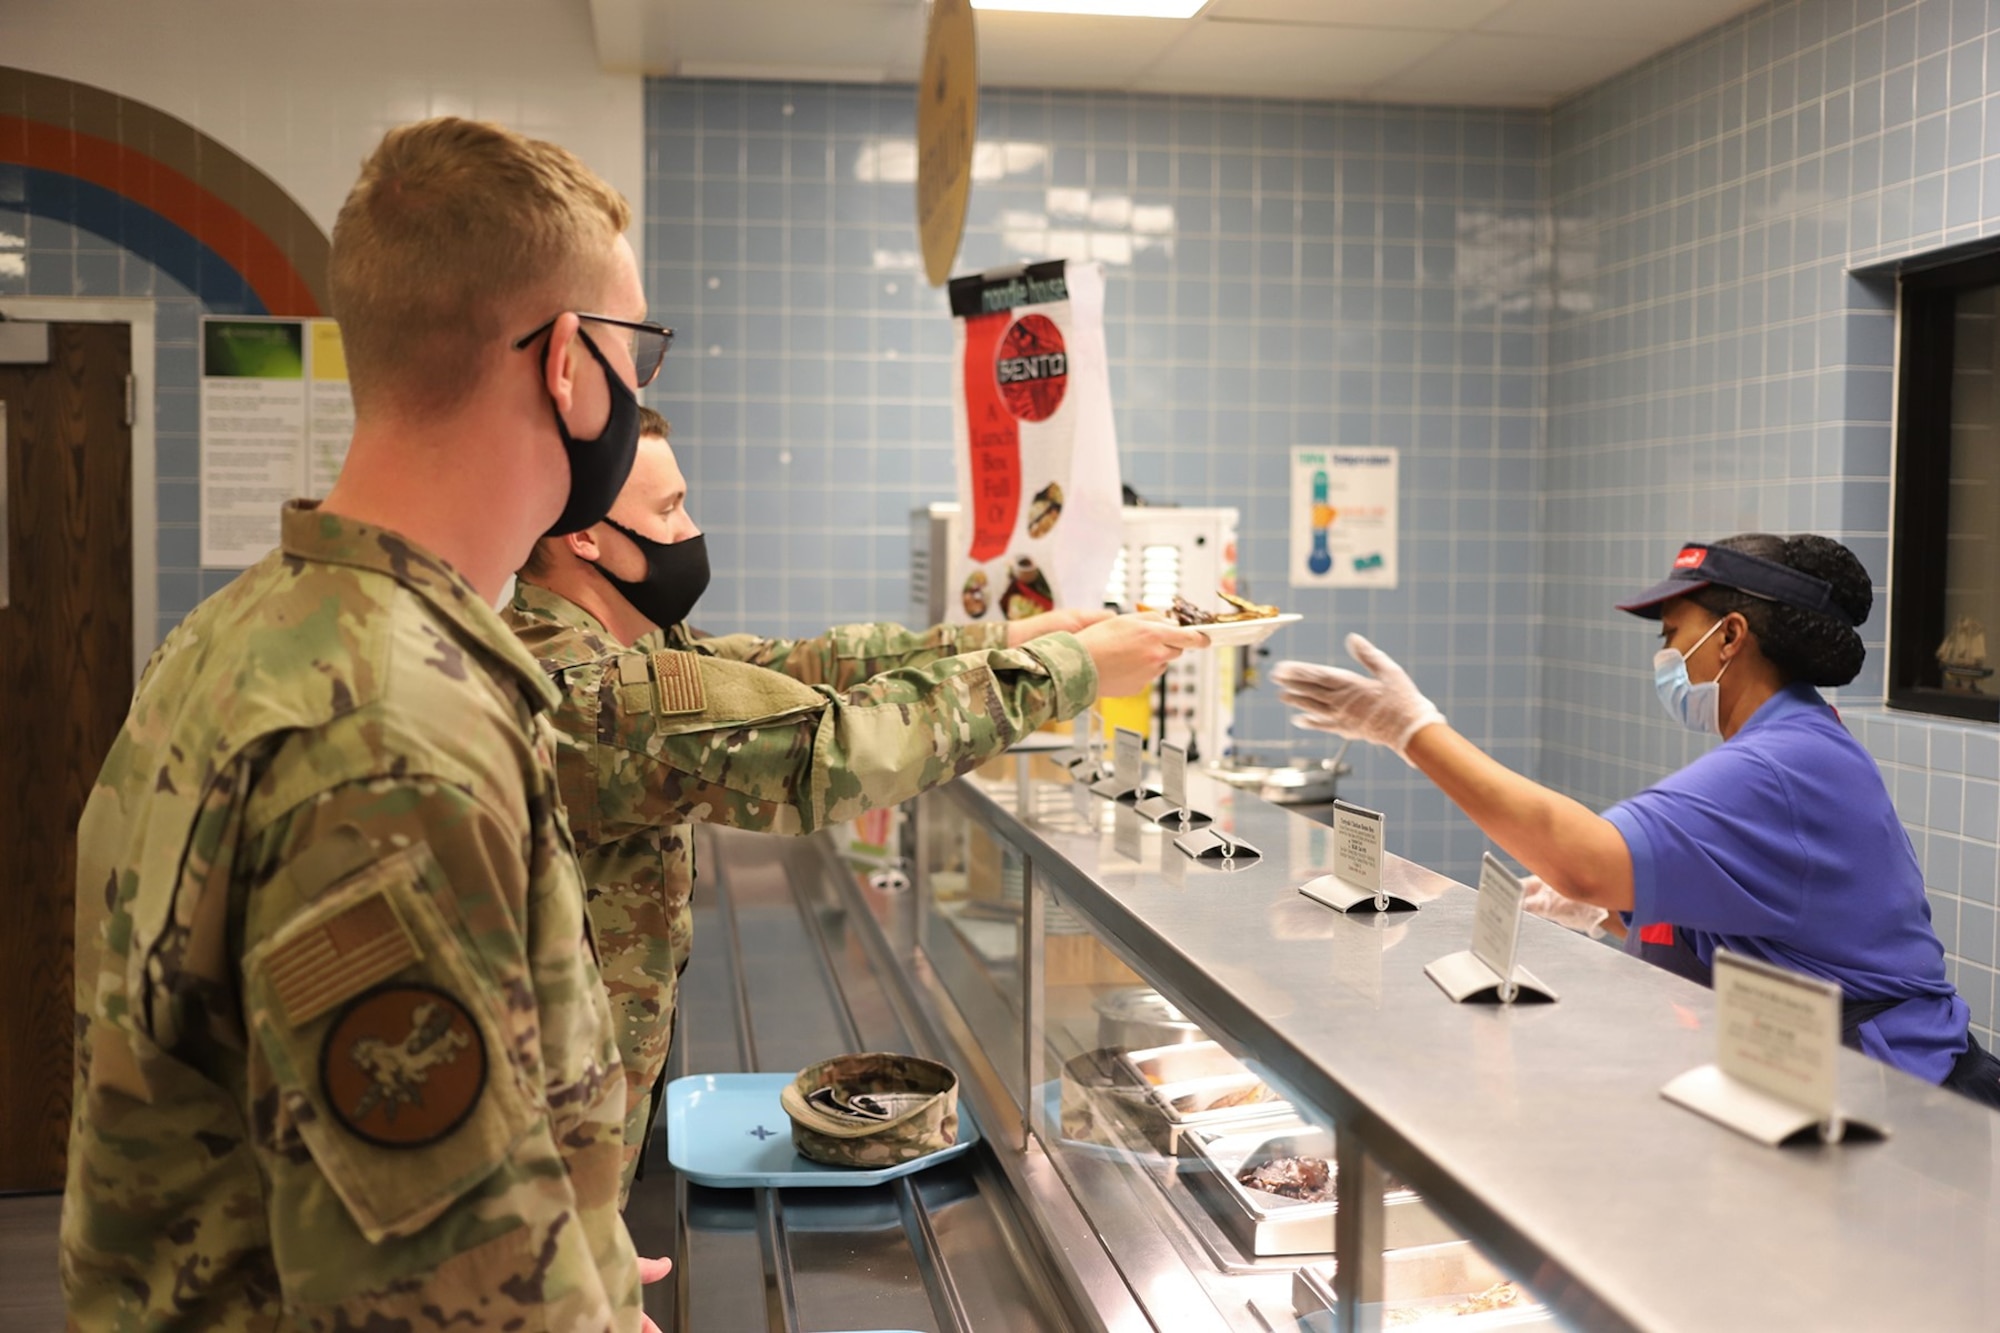 A student receives his lunch at the newly reopened The Beachcombers dining facility at Vandenberg AFB, California, Aug. 6, 2020.